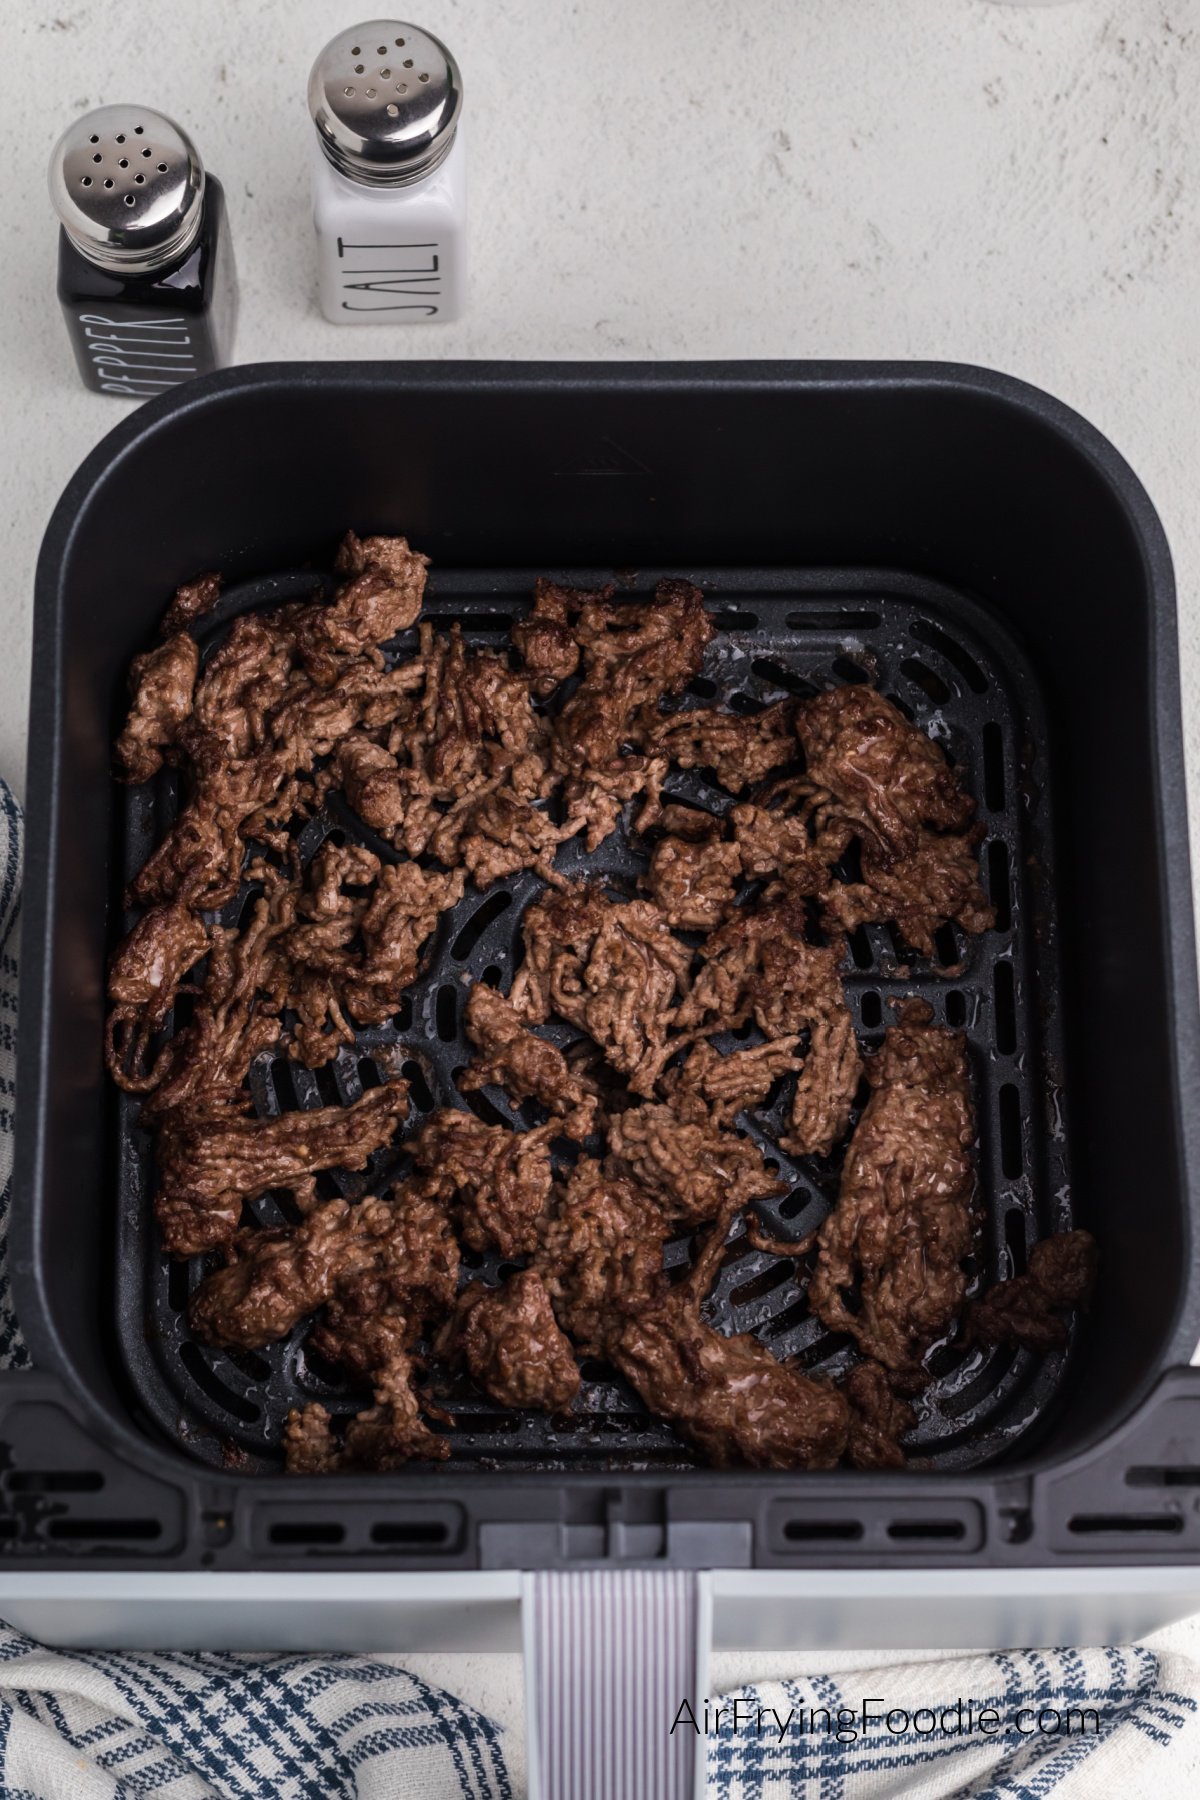 Air fried ground beef in basket of the air fryer, ready to season and serve.